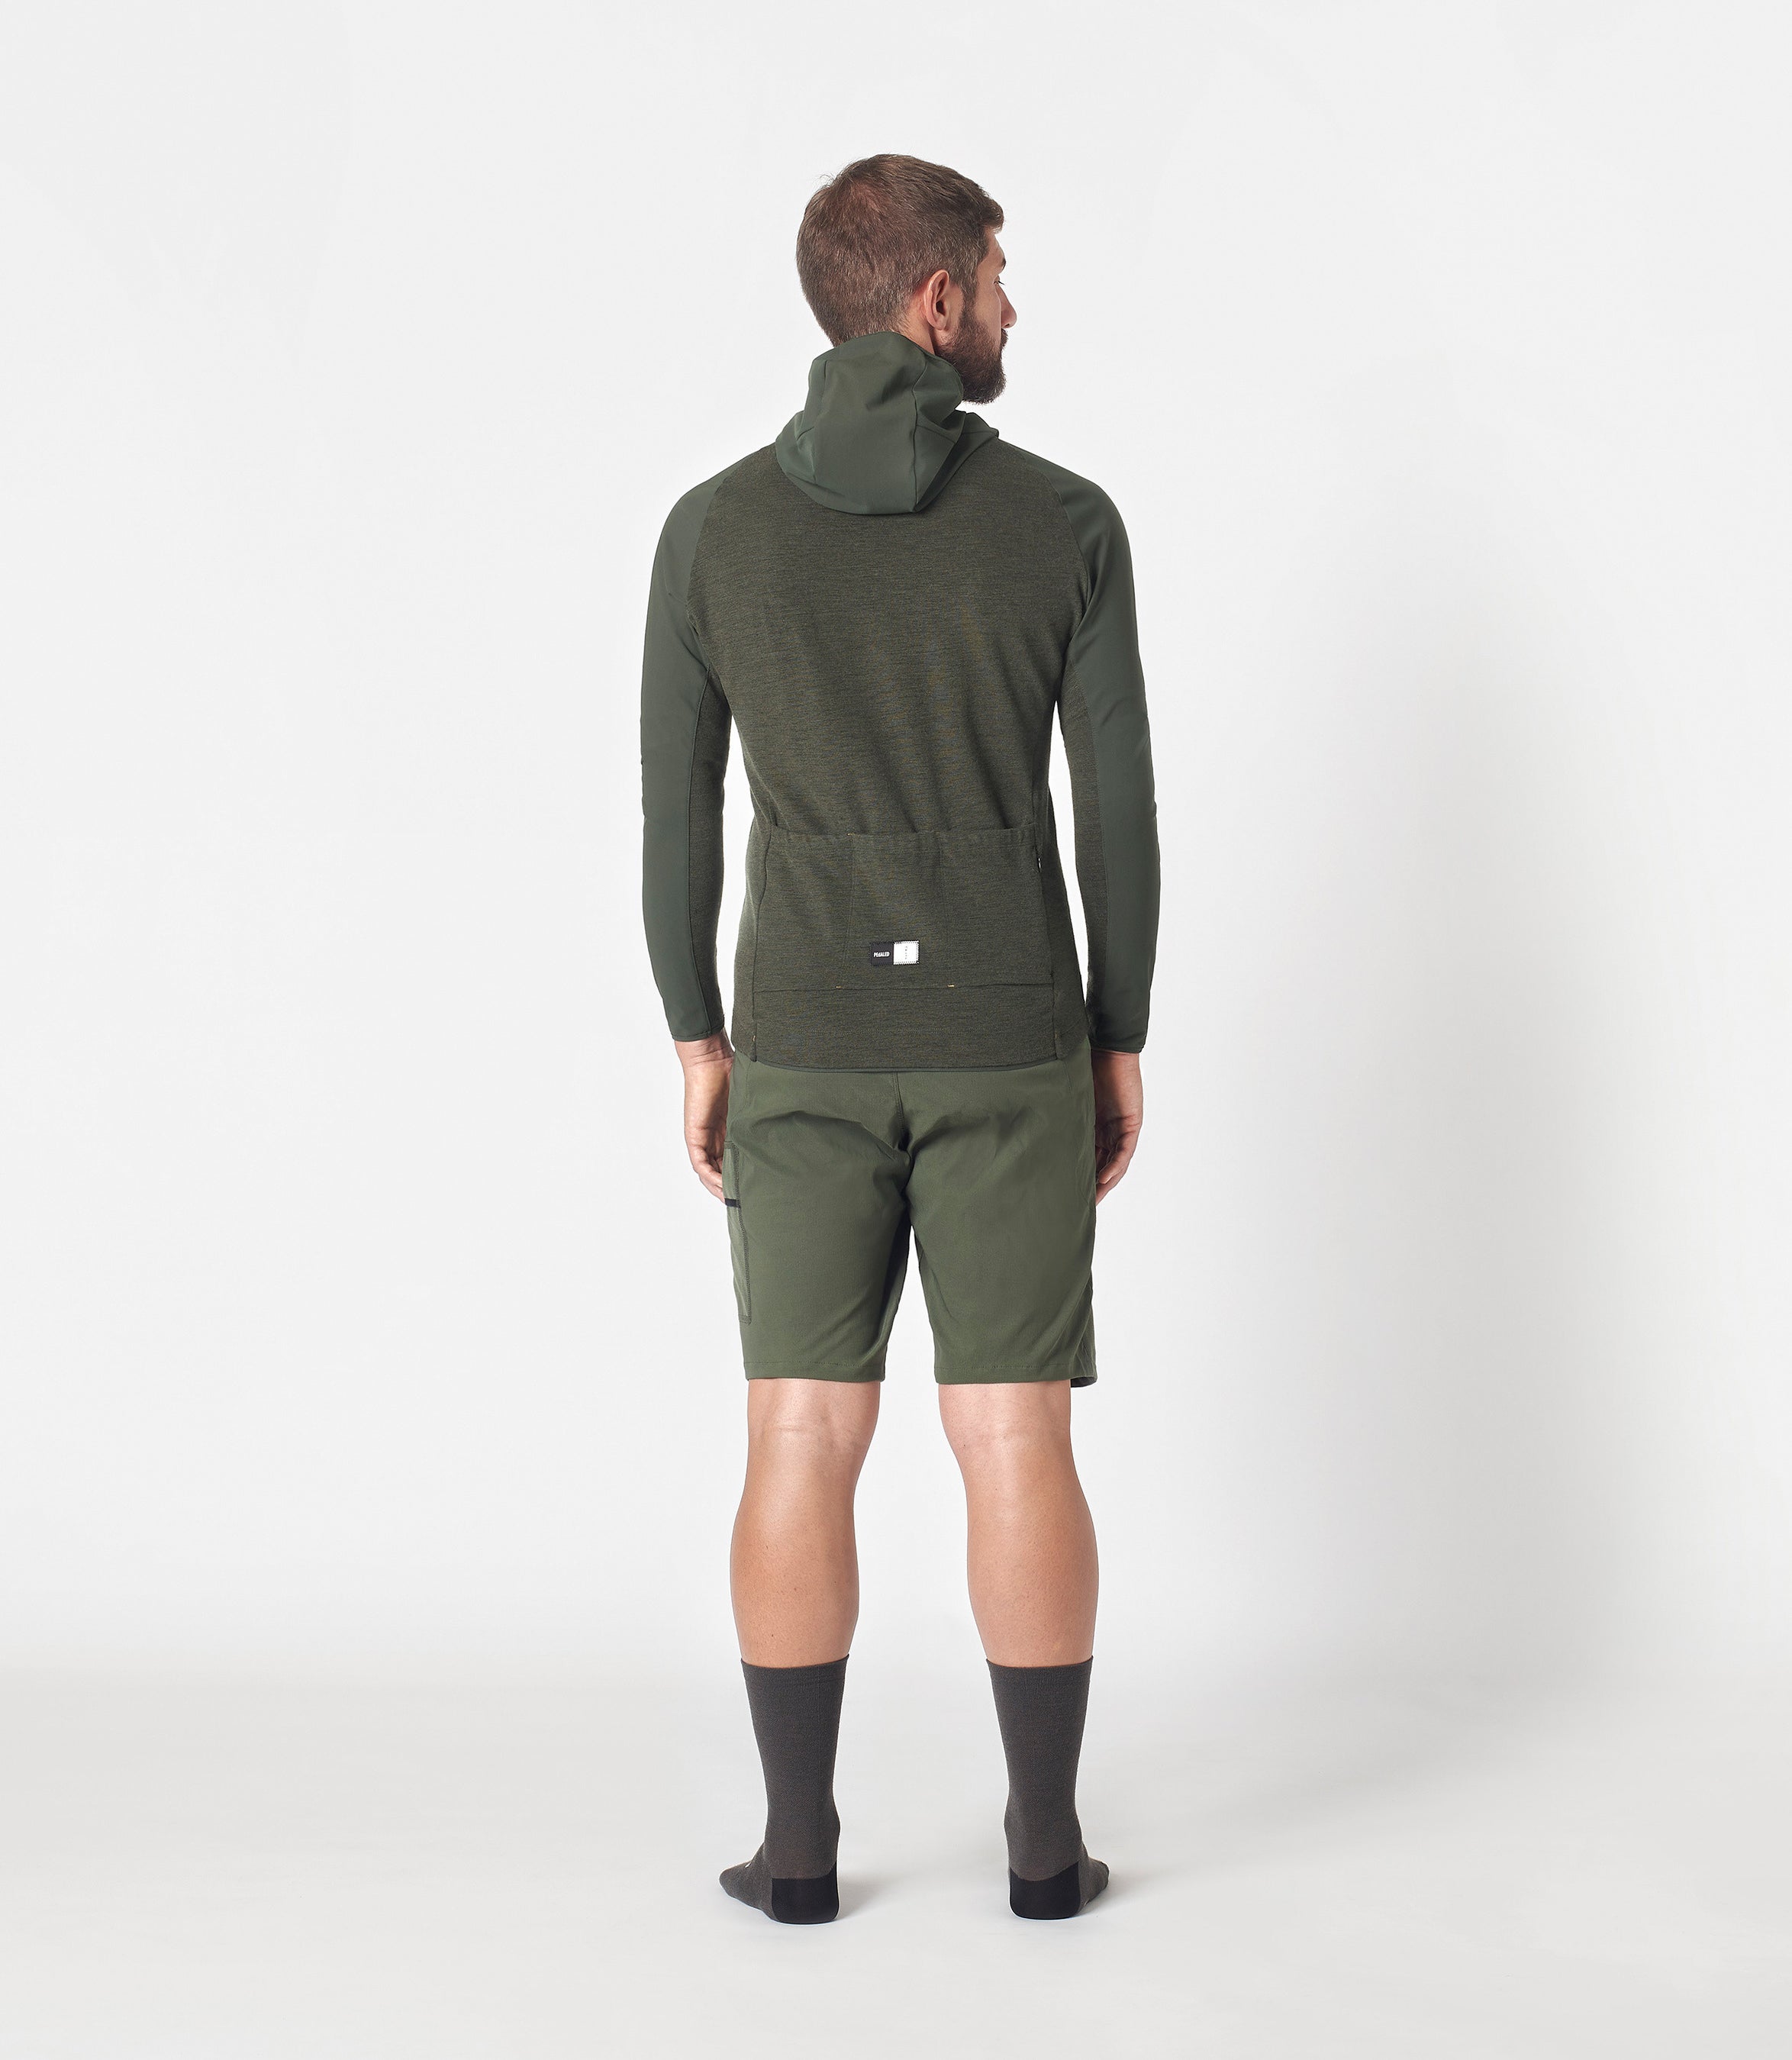 23WHJJA20PE_4_men cycling merino jersey hooded military green jary total body back pedaled